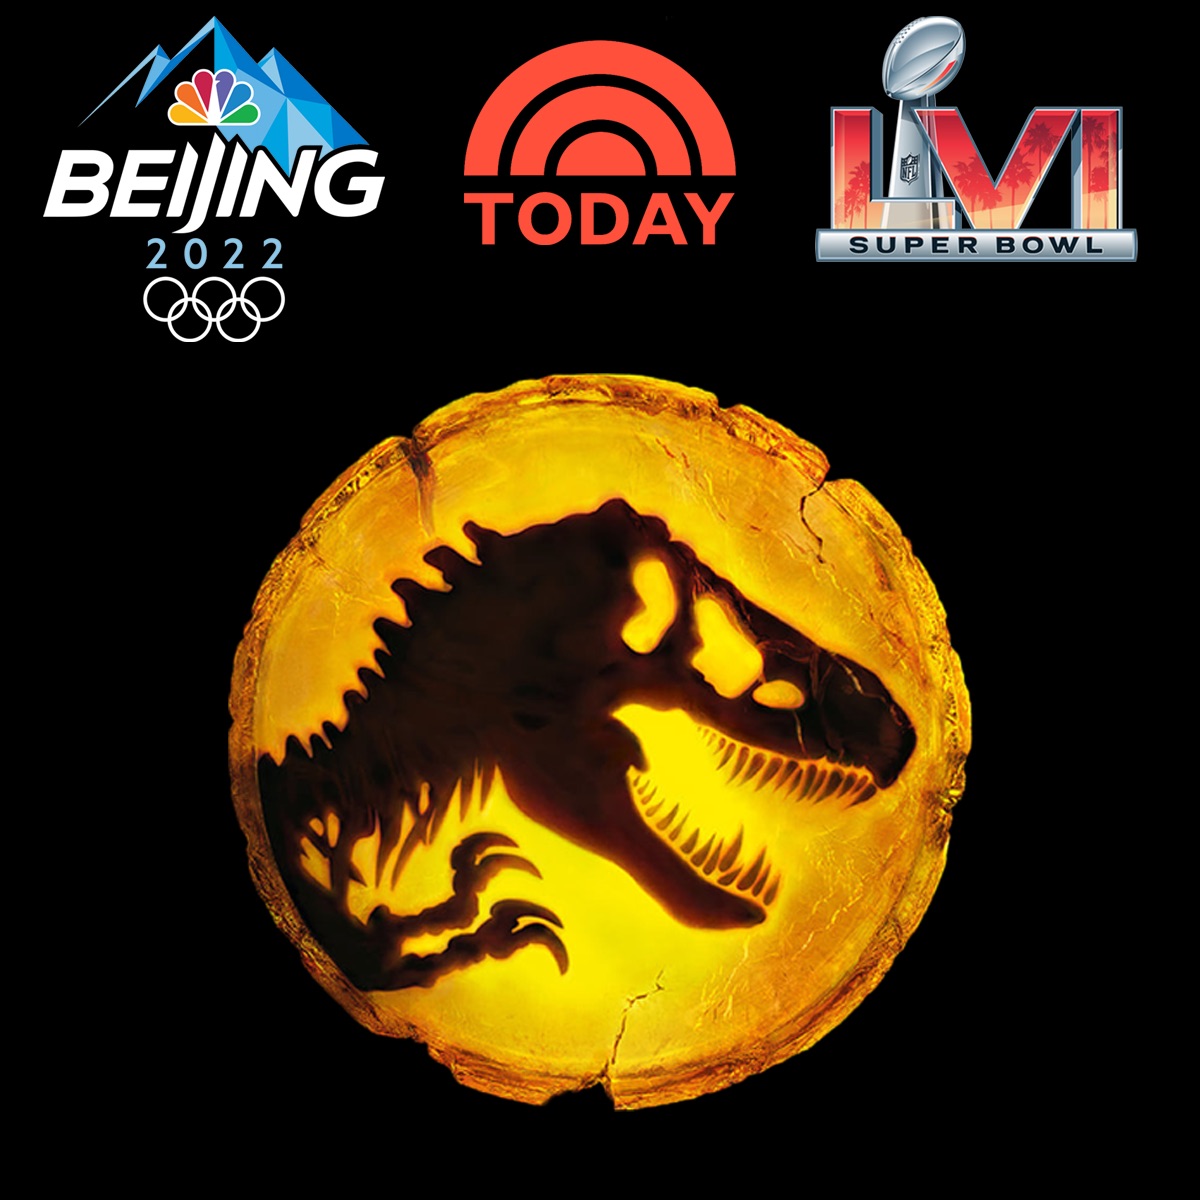 ‘Jurassic World: Dominion’ Marketing Campaign to begin with Winter Olympics tie-in on the TODAY Show!